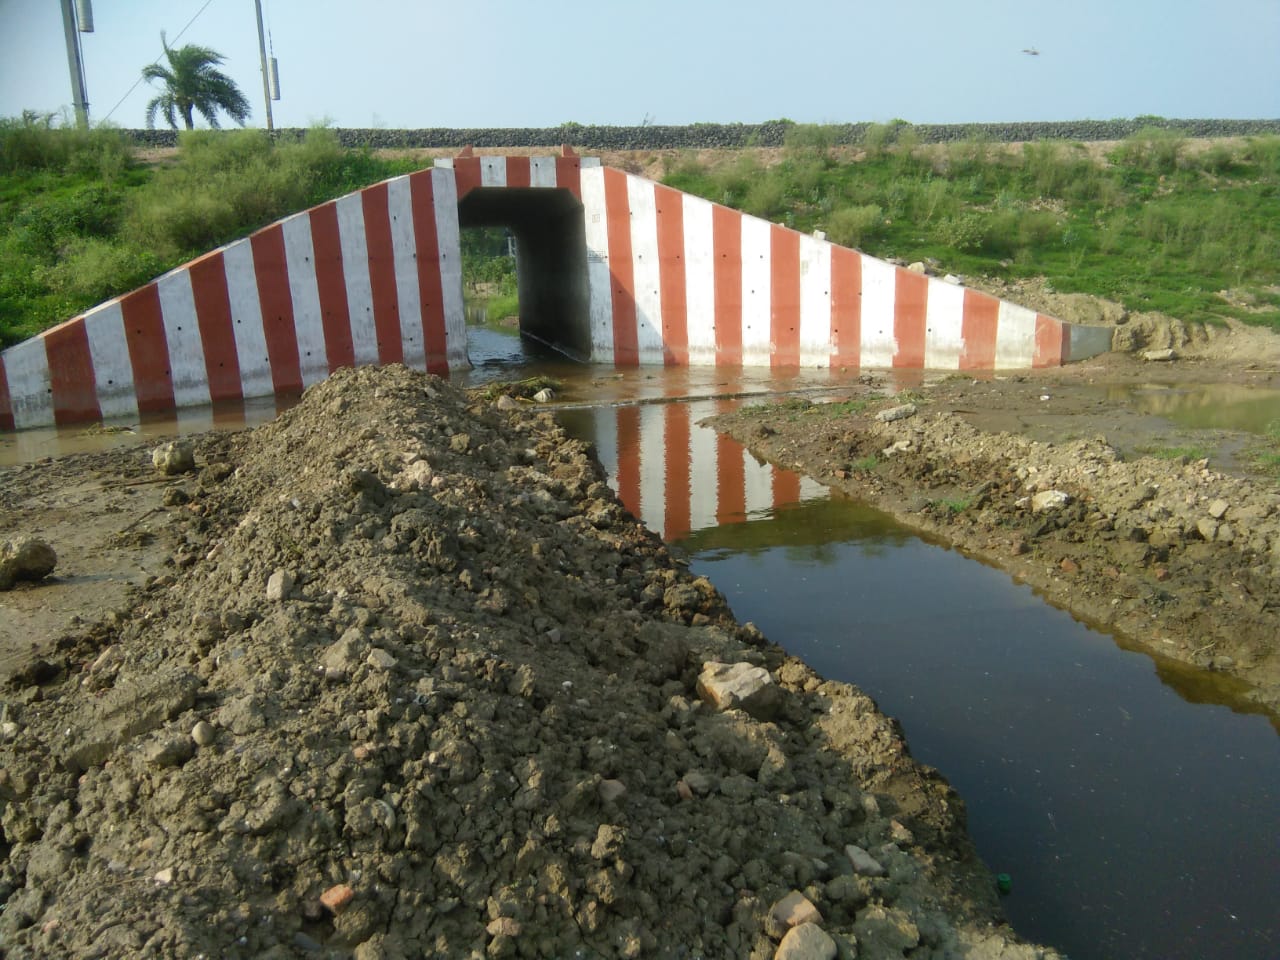 Sluice gate on the canal is kept closed when Ganga river water is high